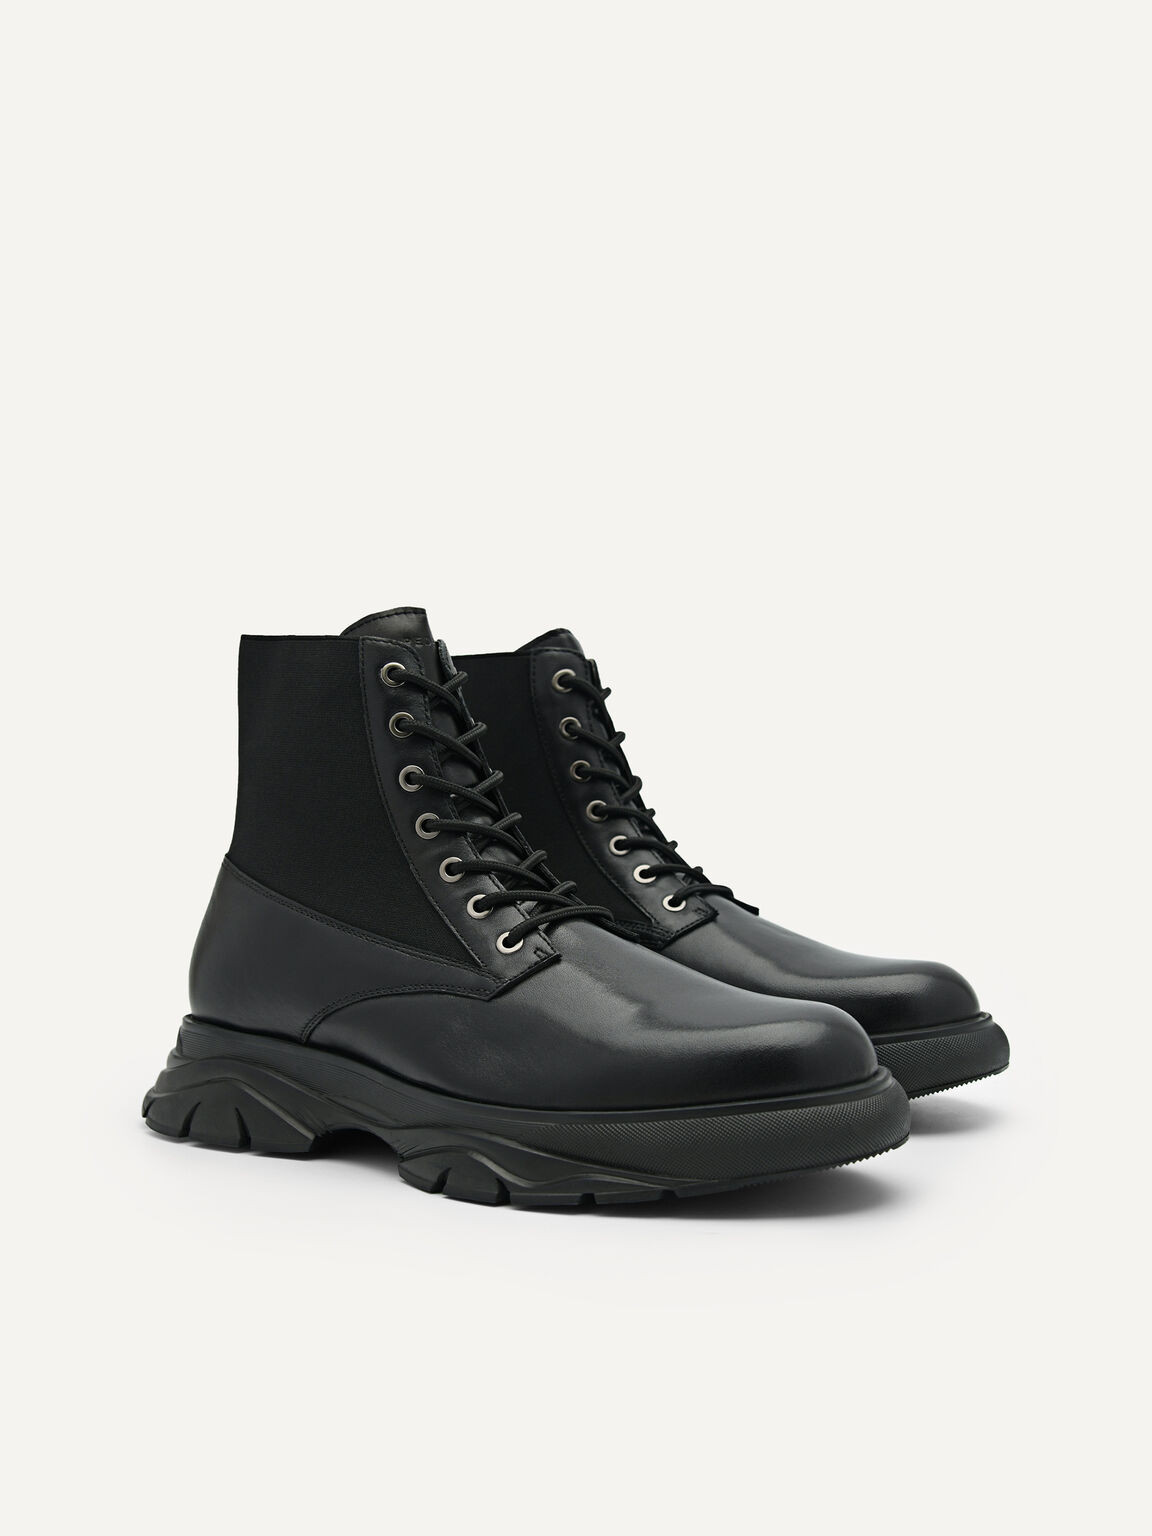 Hybrix Leather Lace-Up Boots, Black